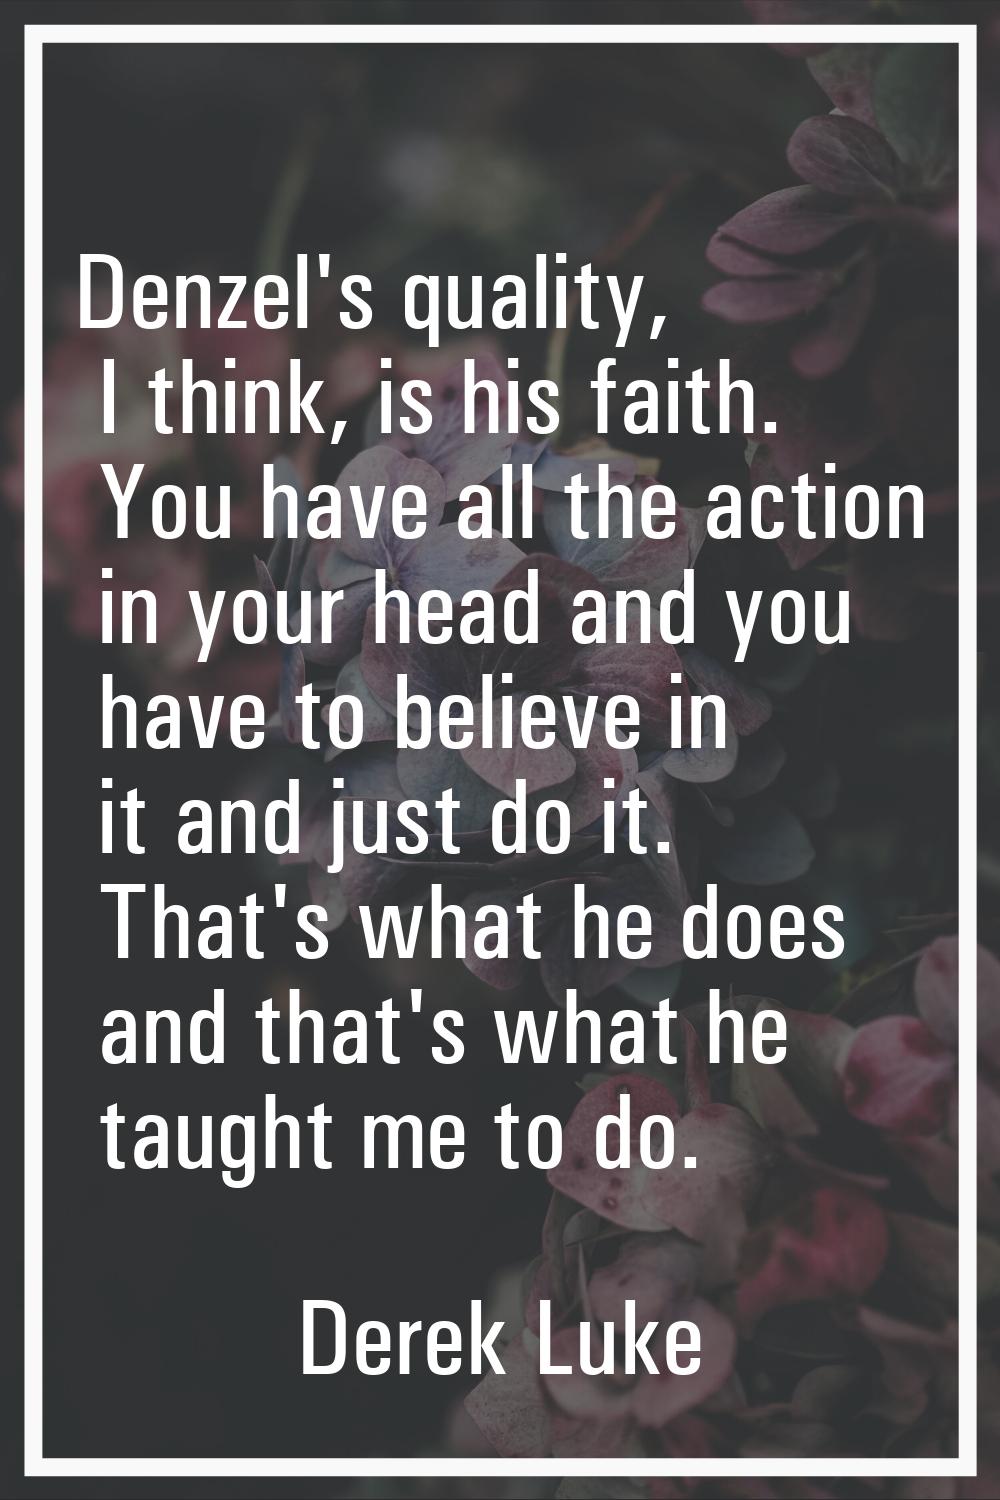 Denzel's quality, I think, is his faith. You have all the action in your head and you have to belie